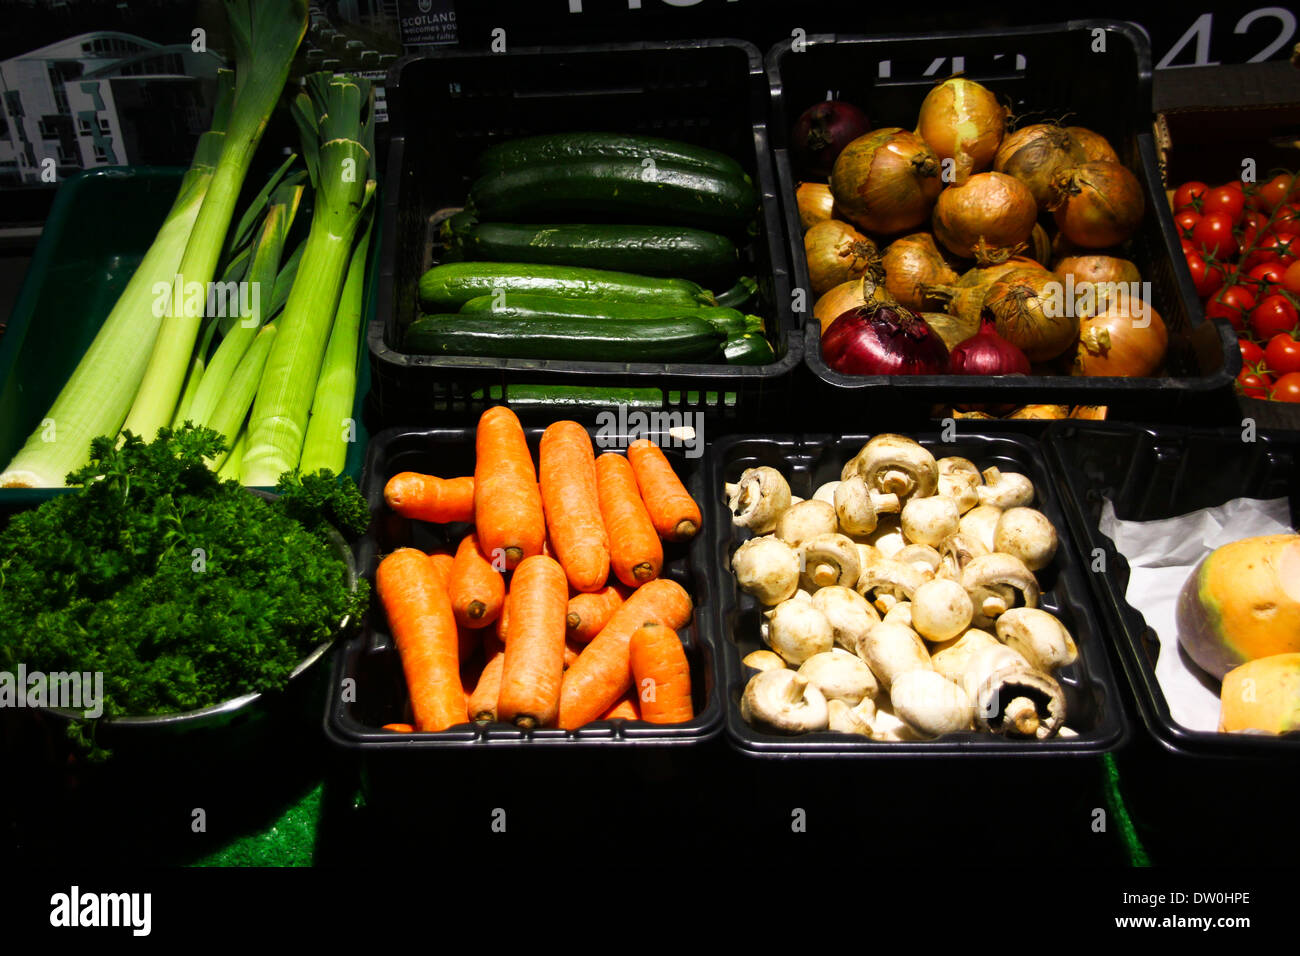 Fruit and veg display in shop Stock Photo